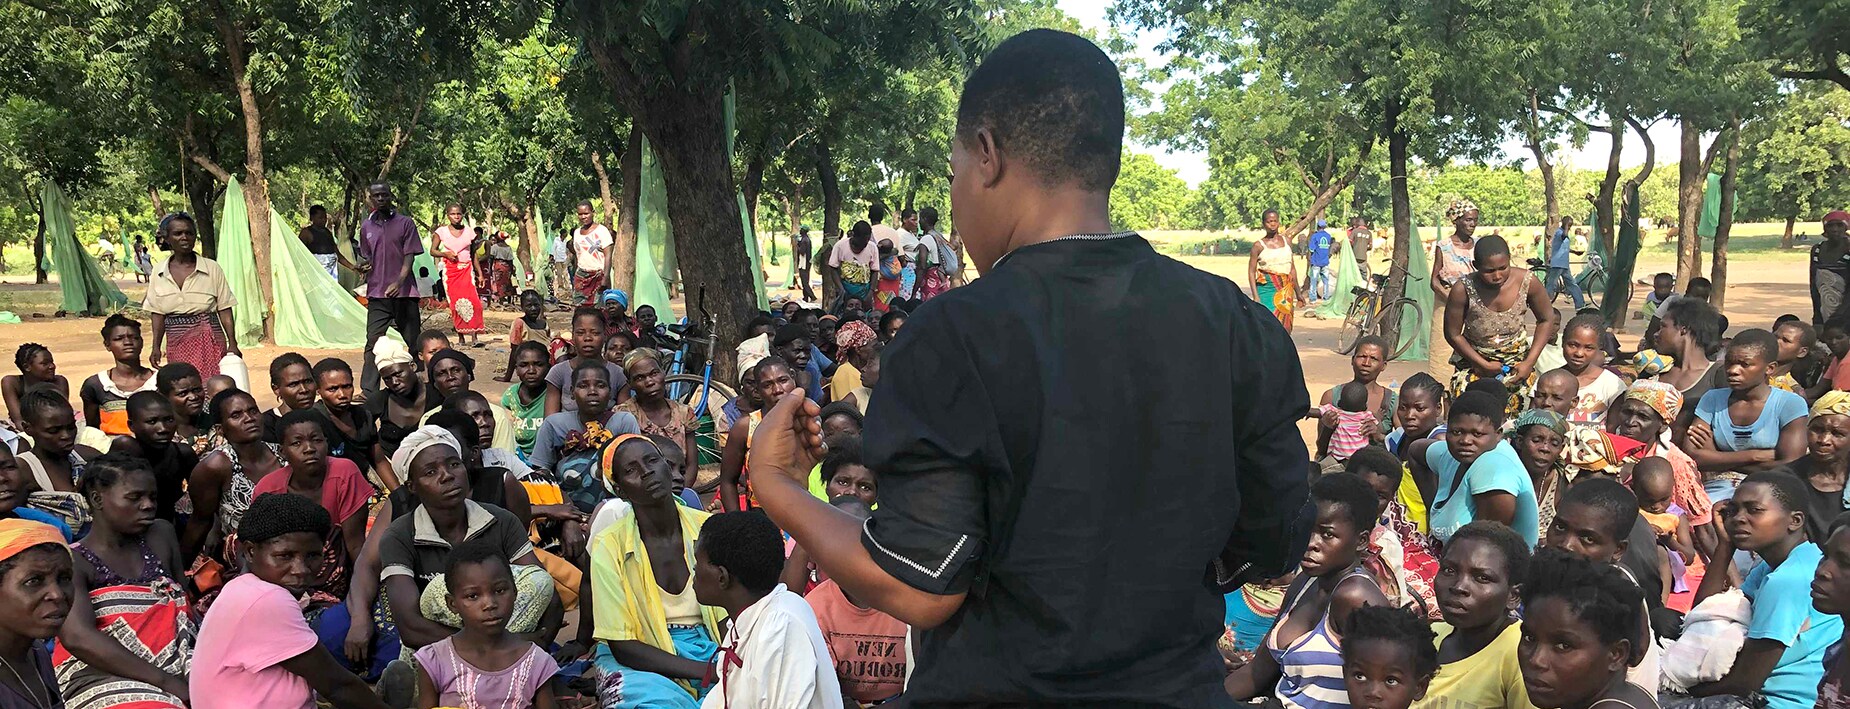 After Cyclone Idai, a community hygiene promoter educates displaced people in Malawi about cholera prevention.